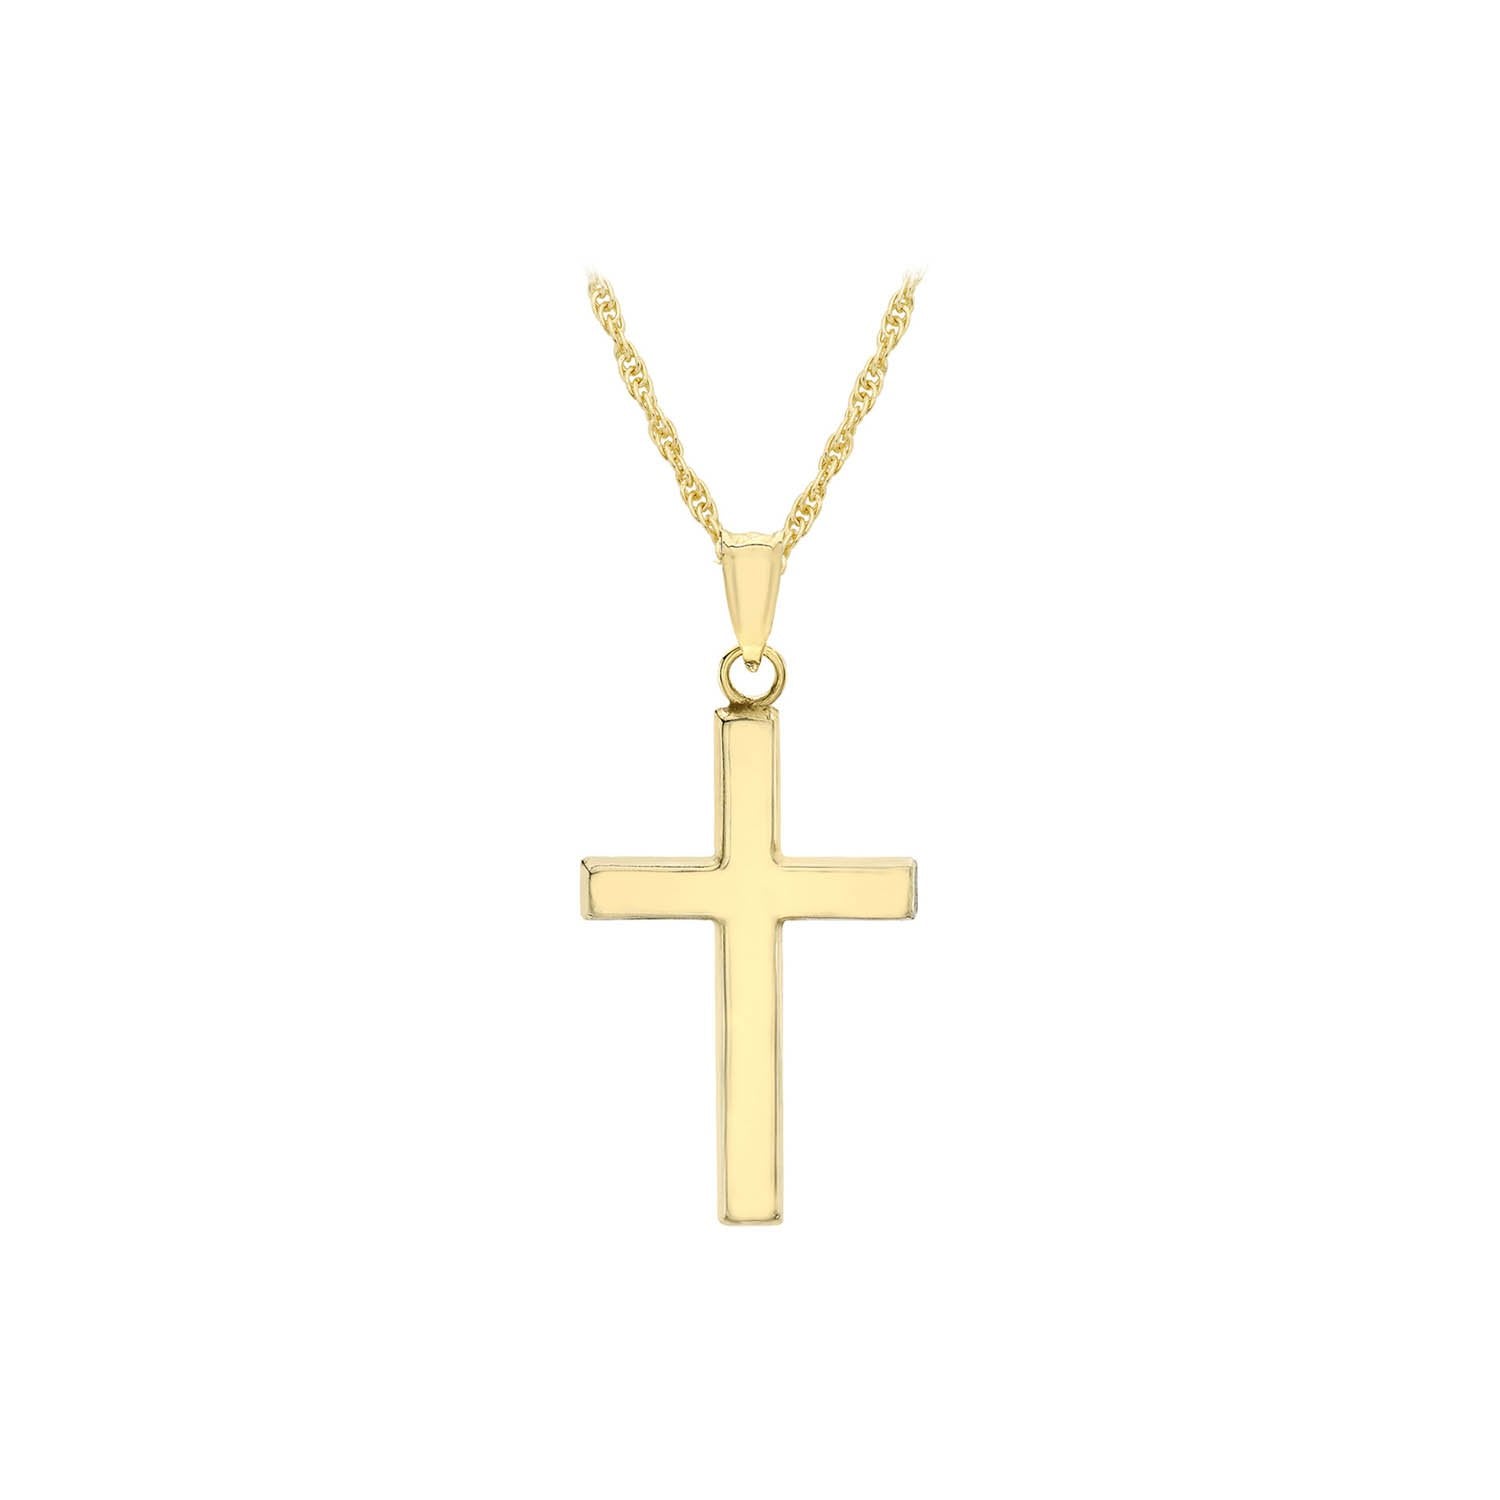 9ct Yellow Gold 15mm x 25mm Cross 14 'Prince of Wales' Chain Necklace 46cm